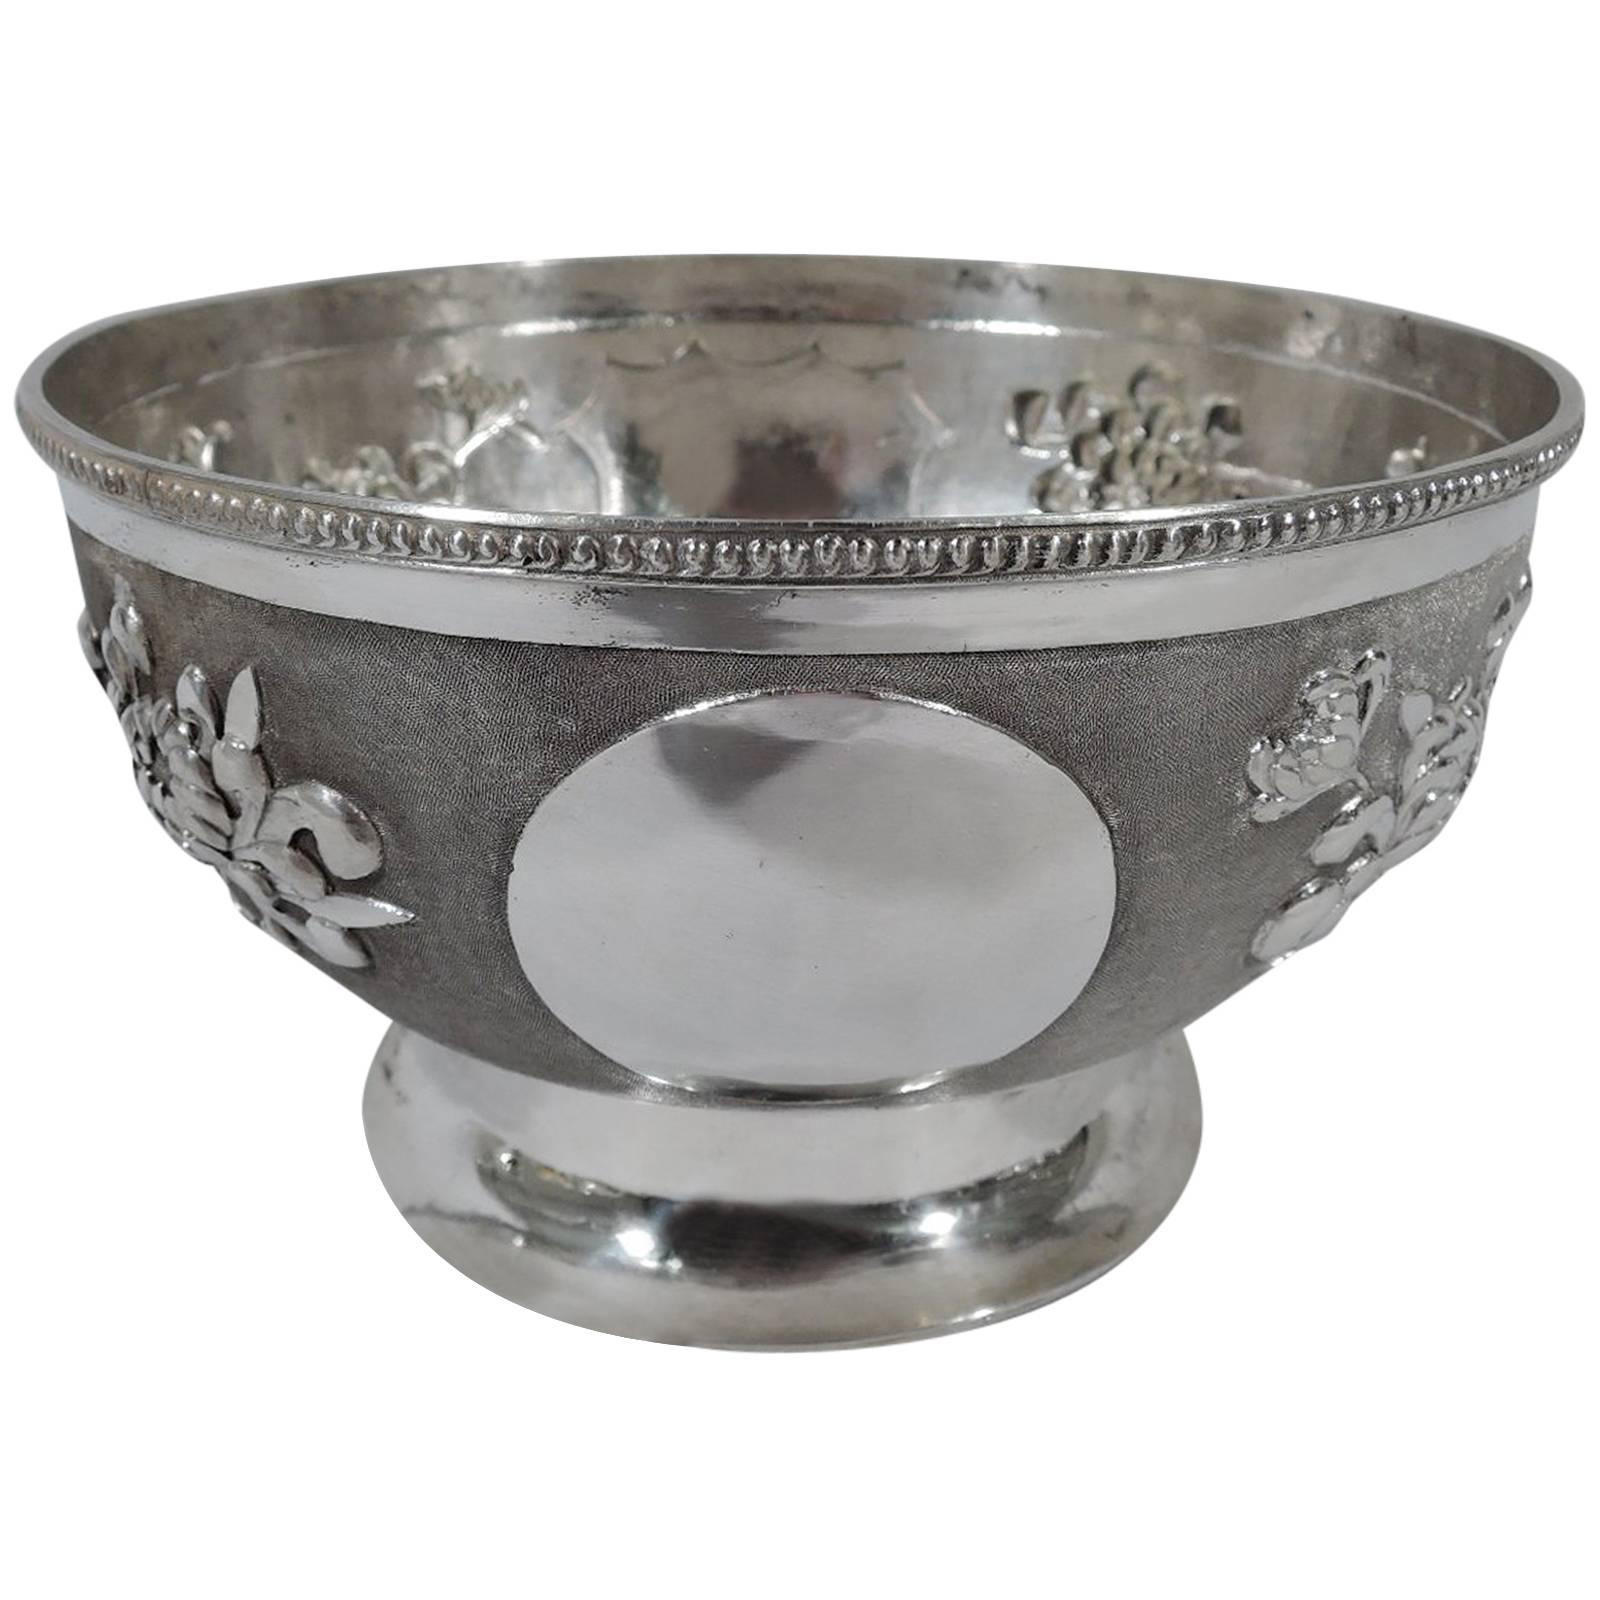 Beautiful Chinese Silver Bowl with Chrysanthemums